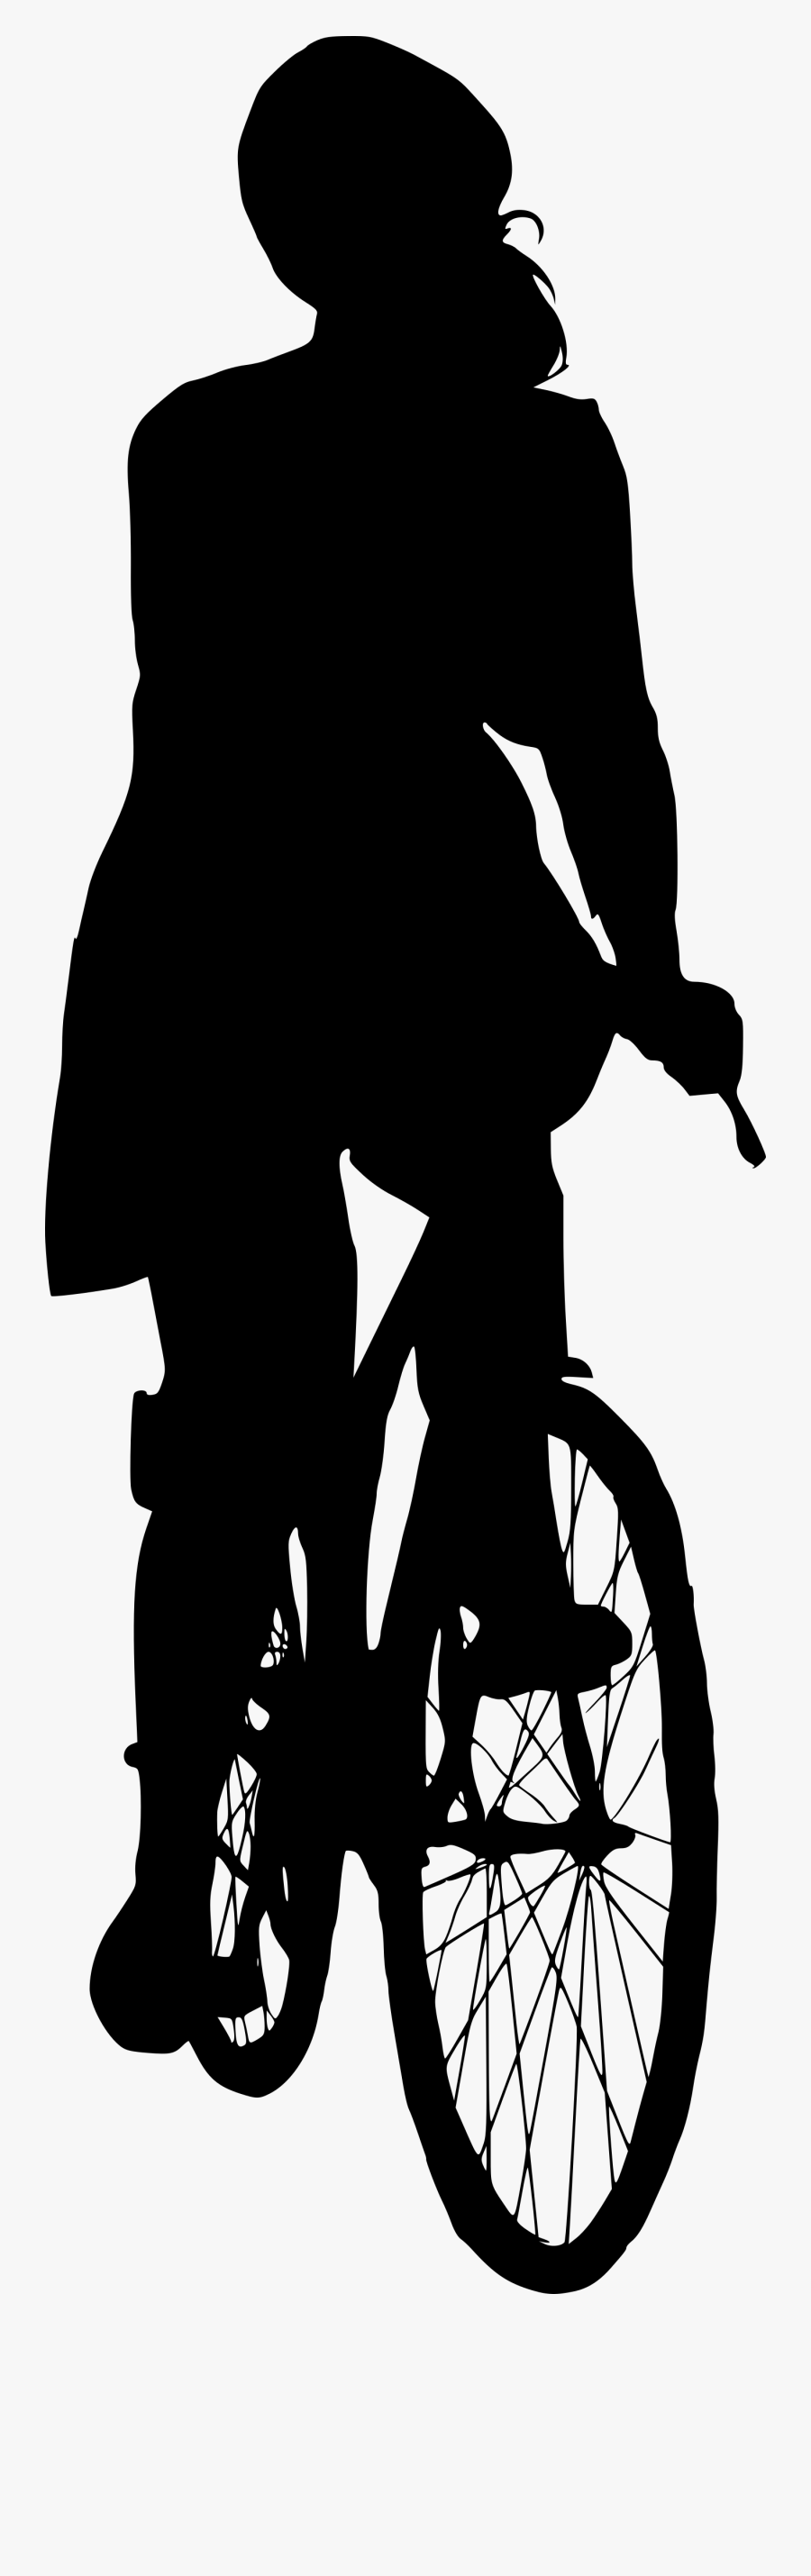 6 Bicycle Ride Silhouette Front View - Bicycle Rider Png Front, Transparent Clipart